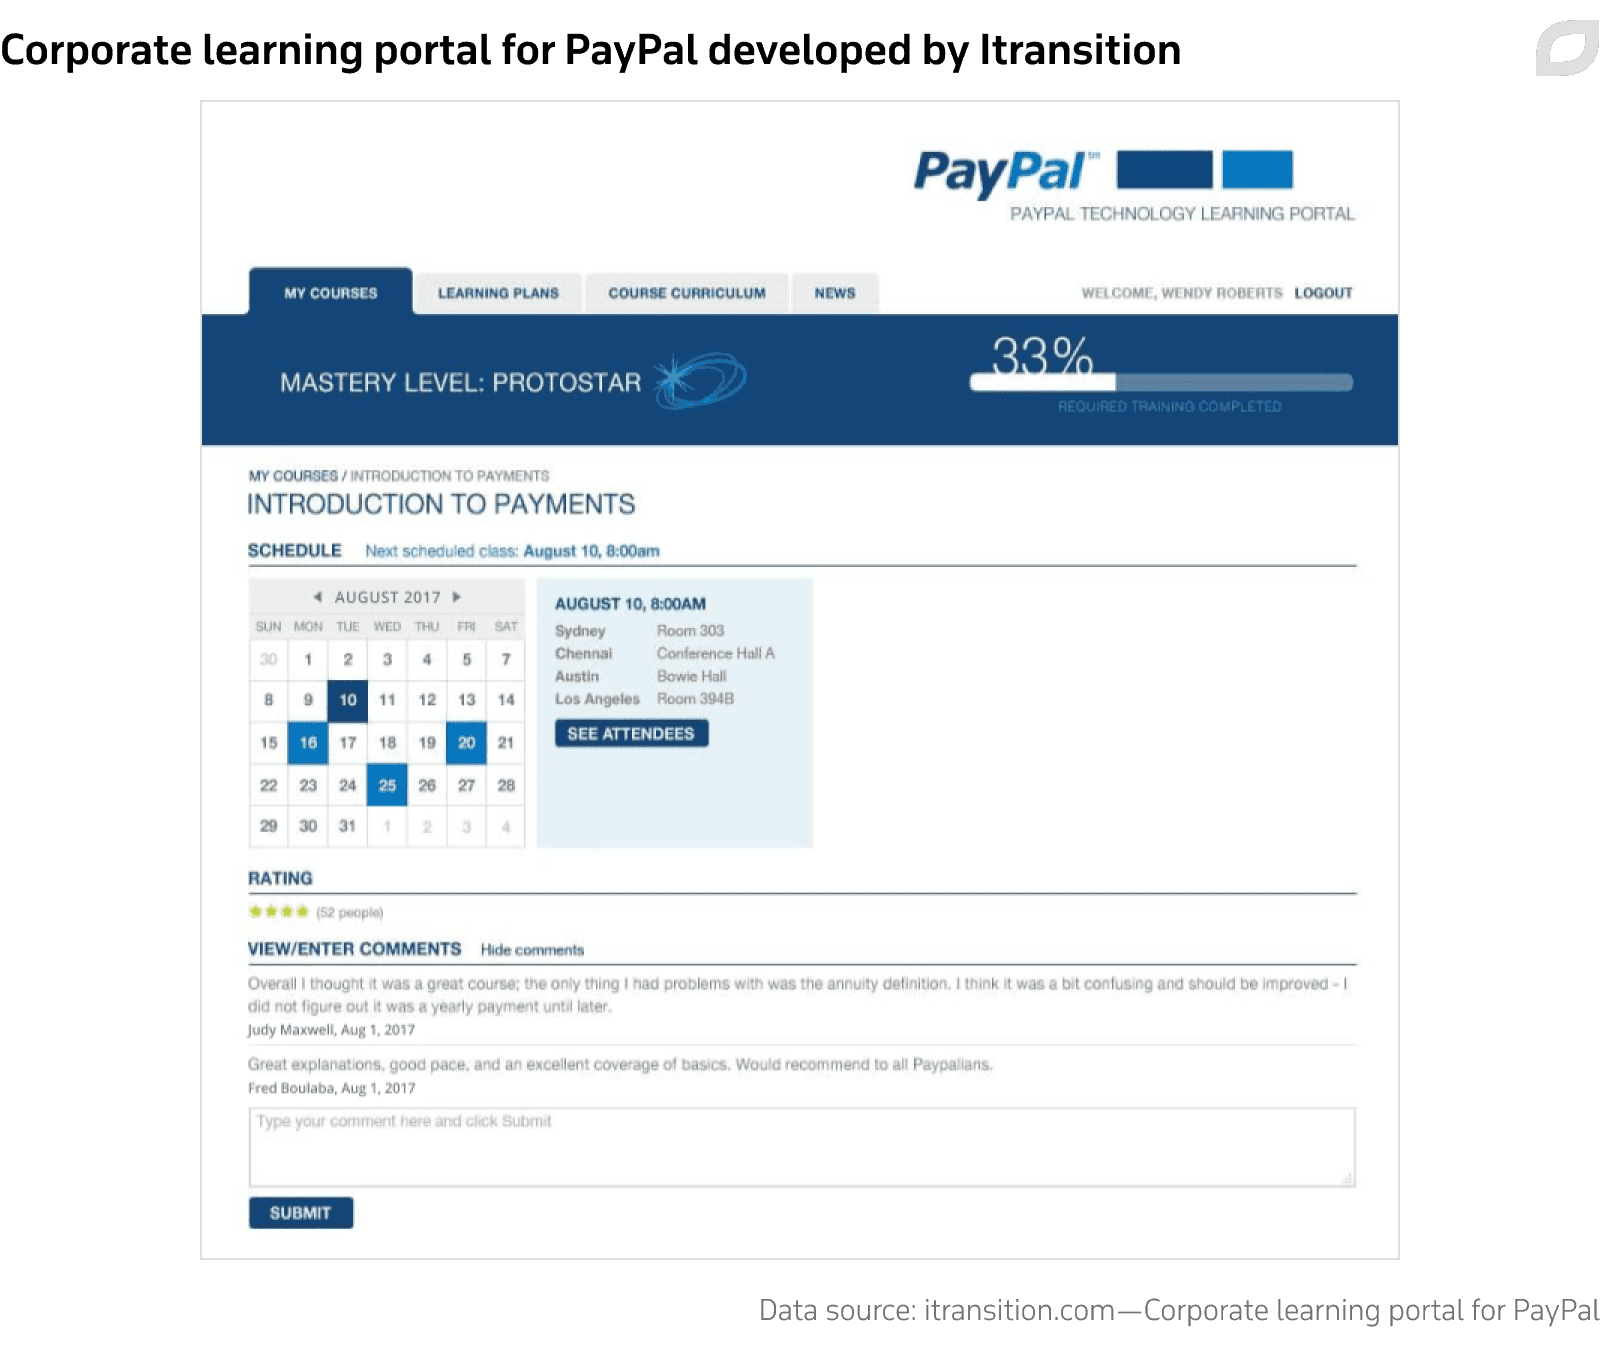 Corporate learning portal for PayPal developed by Itransition